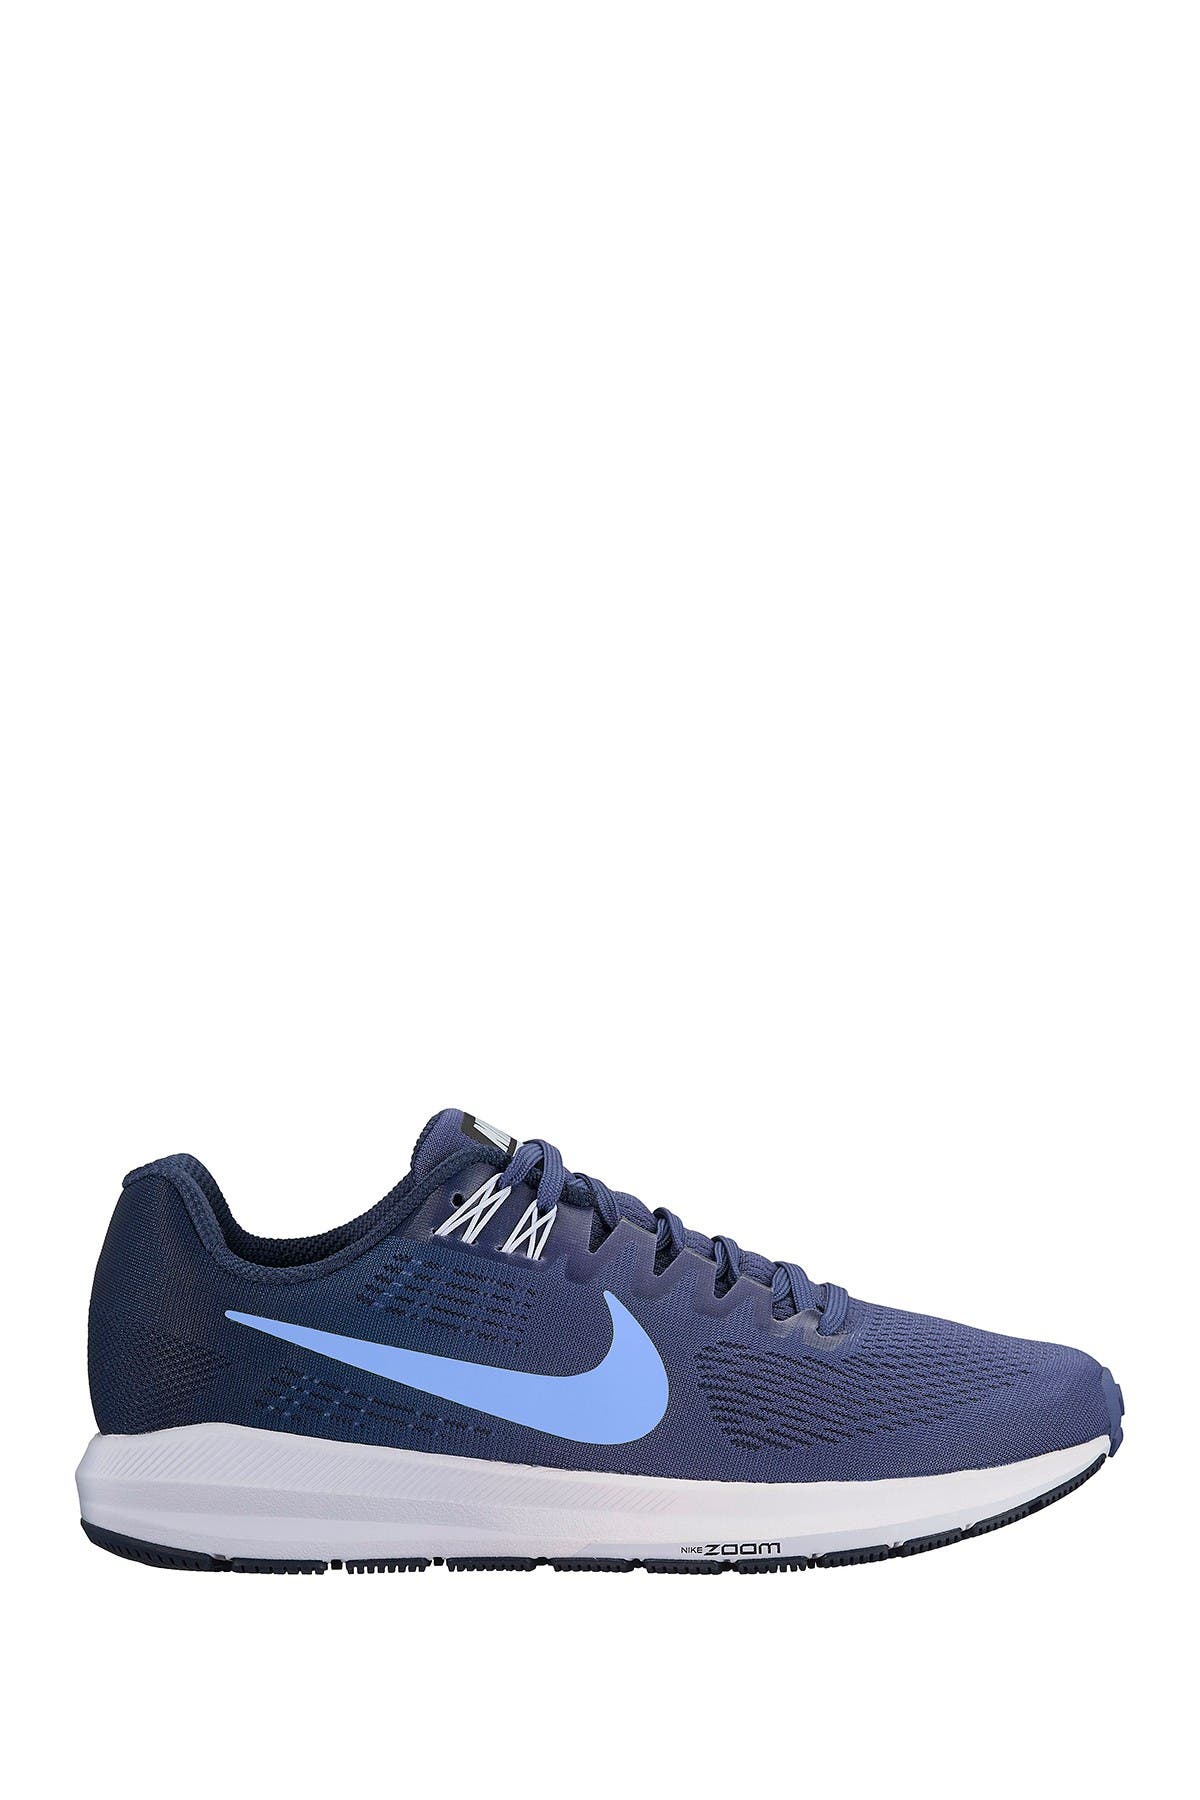 nike men's air zoom structure 21